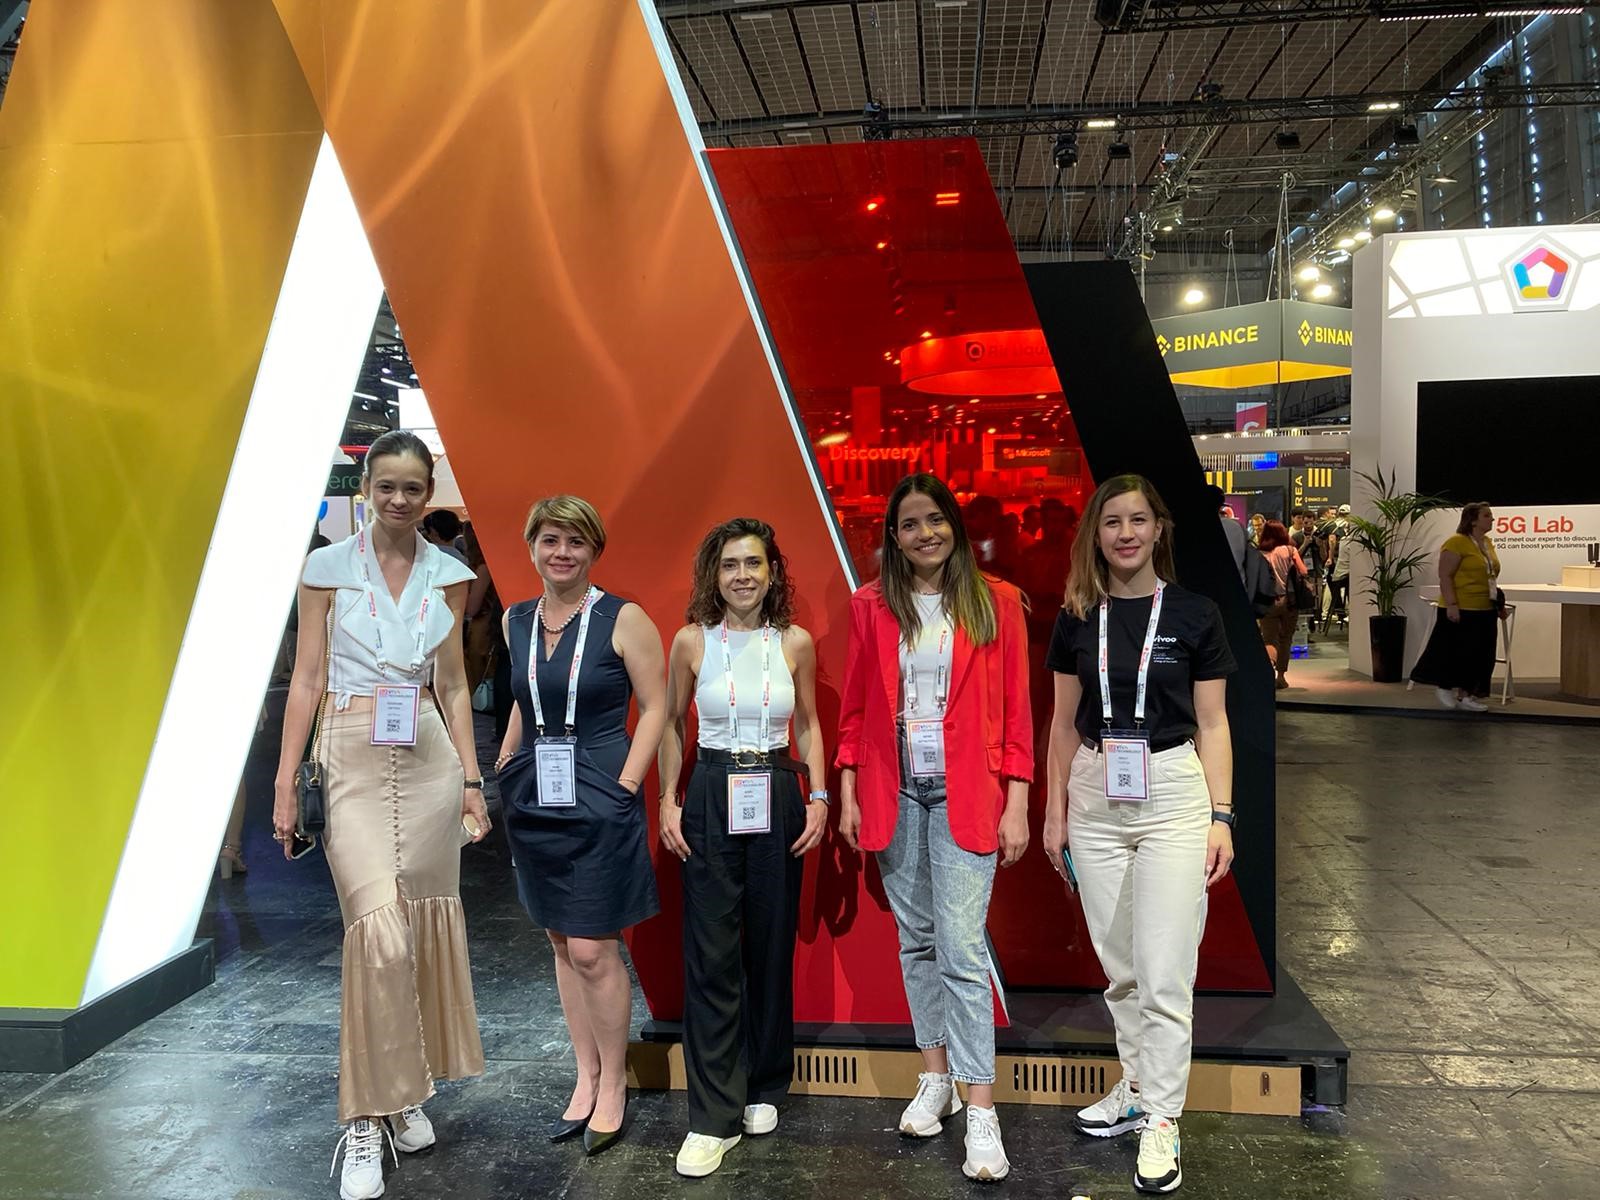 Women entrepreneurs of TİM-TEB Enterprise House participated in Viva Technology, Europe's largest startup and technology fair